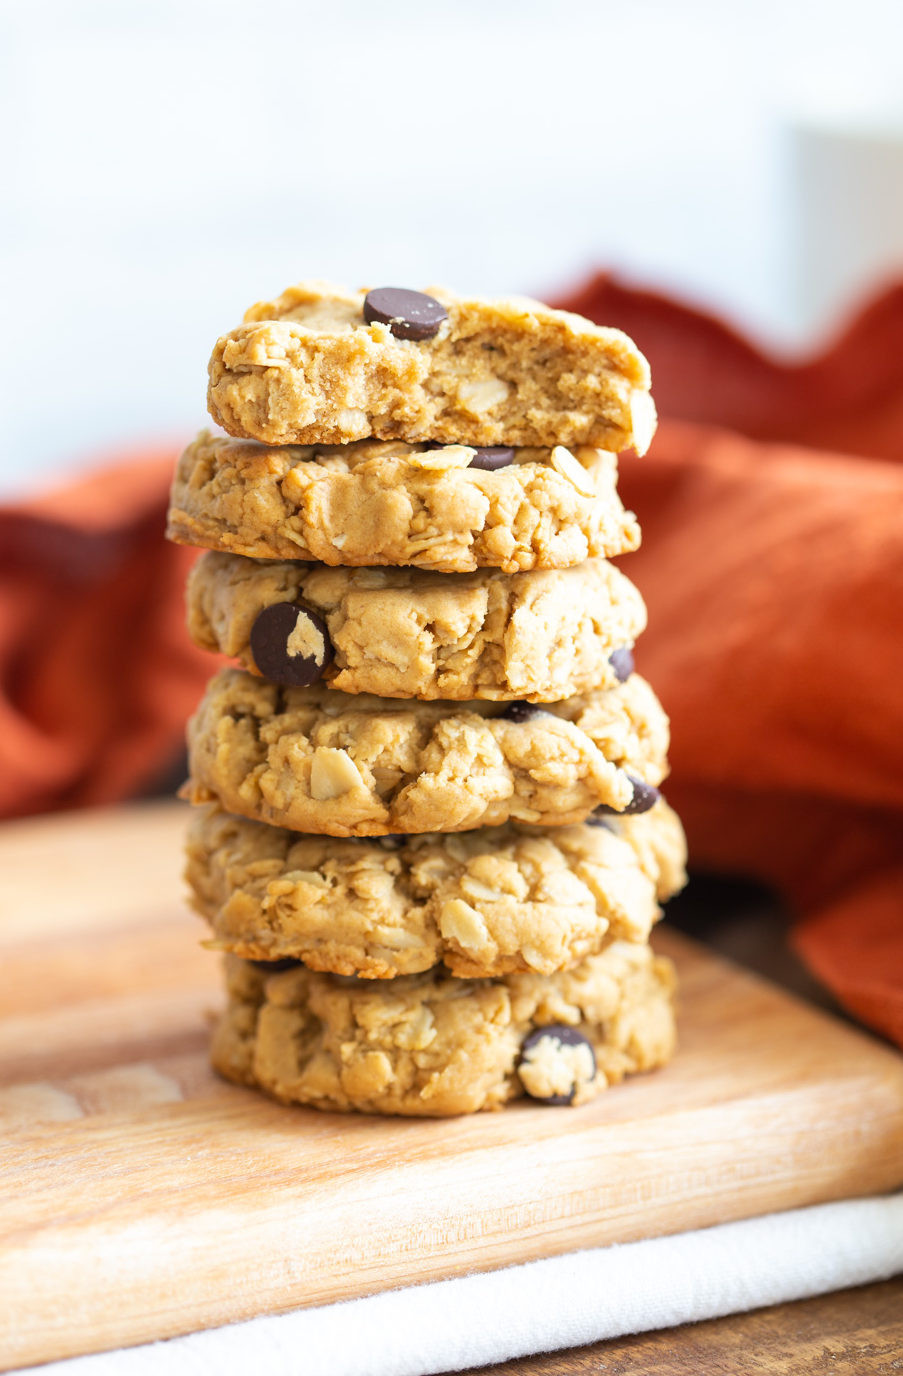 Chocolate Chip Peanut Butter Oatmeal Cookies
 Vegan Peanut Butter Oatmeal Chocolate Chip Cookies 1 Bowl